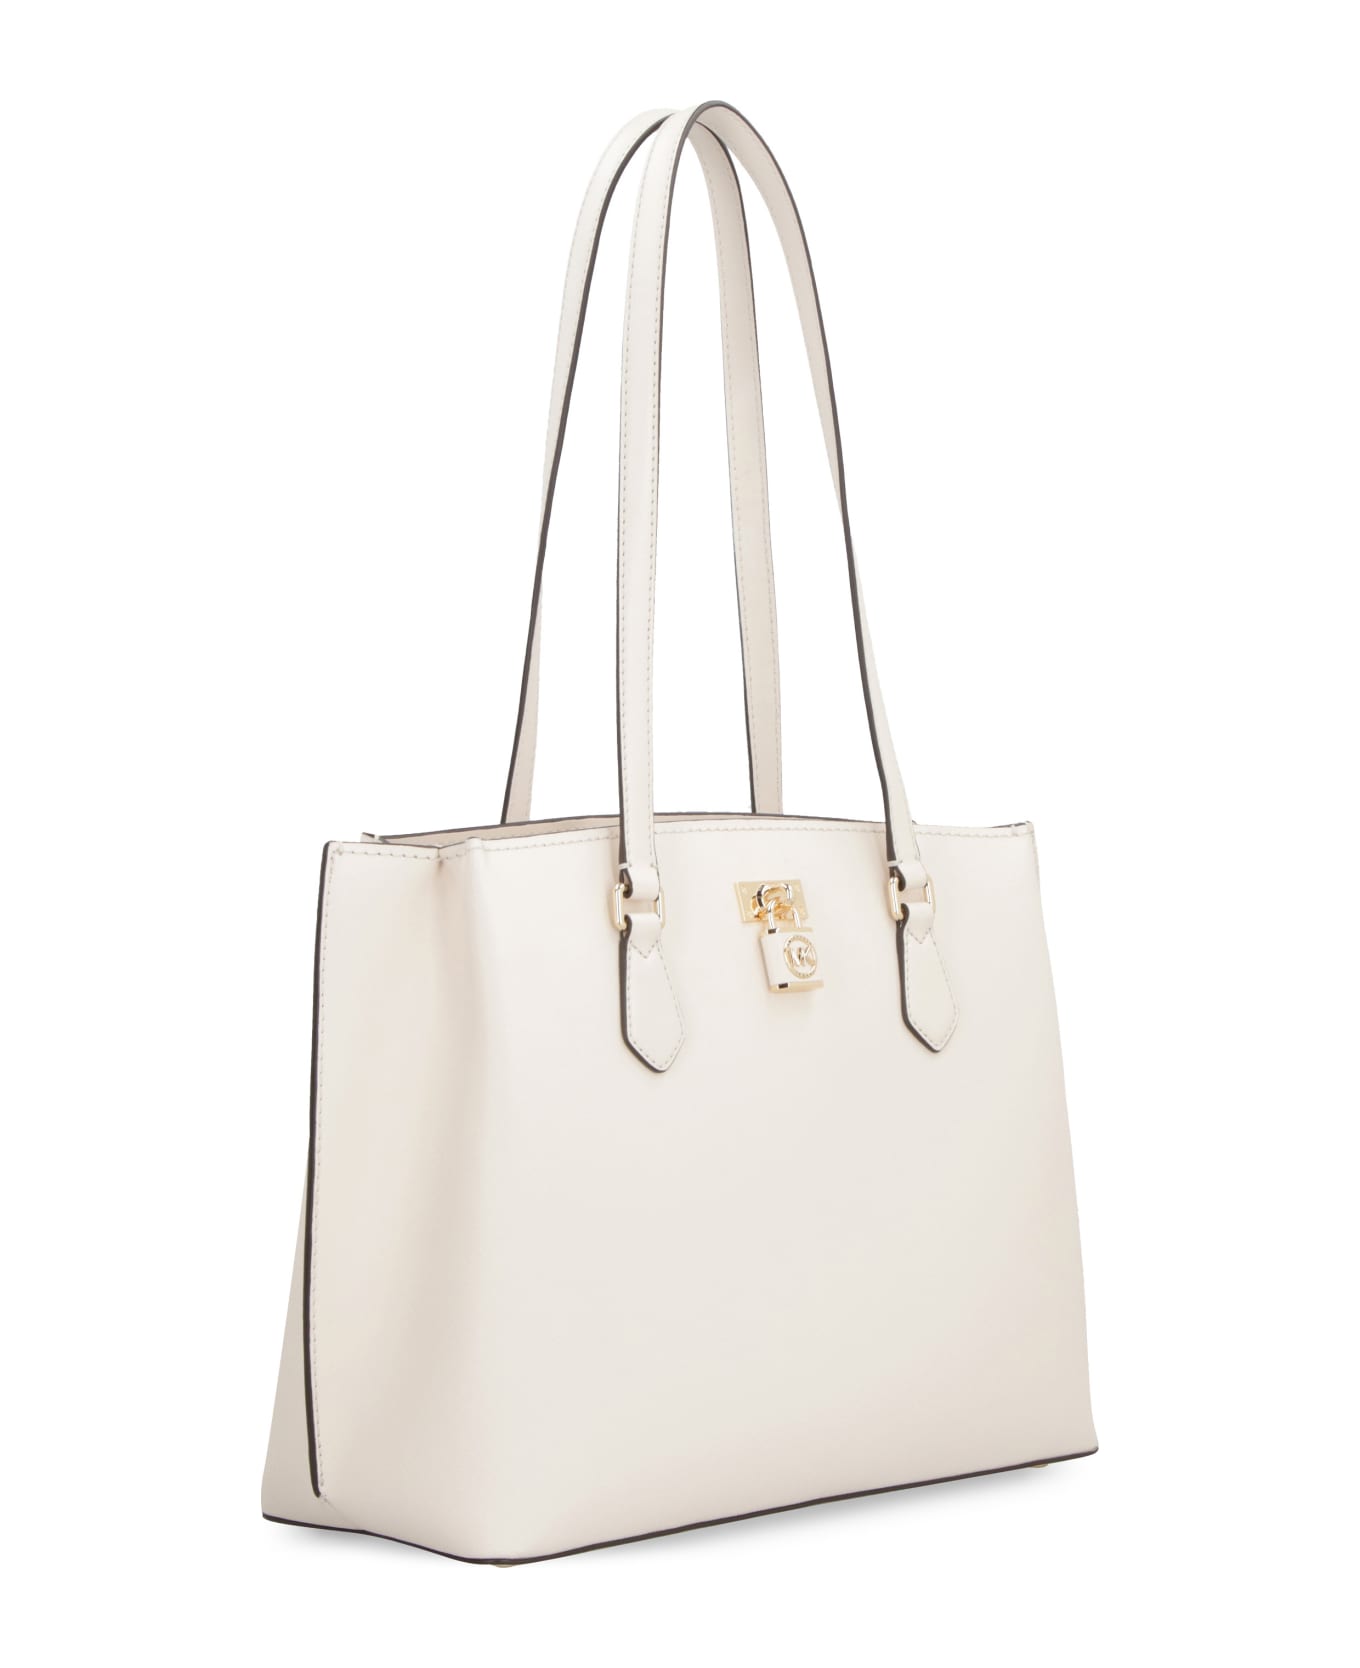 MICHAEL Michael Kors Ruby Leather Tote - Ivory トートバッグ